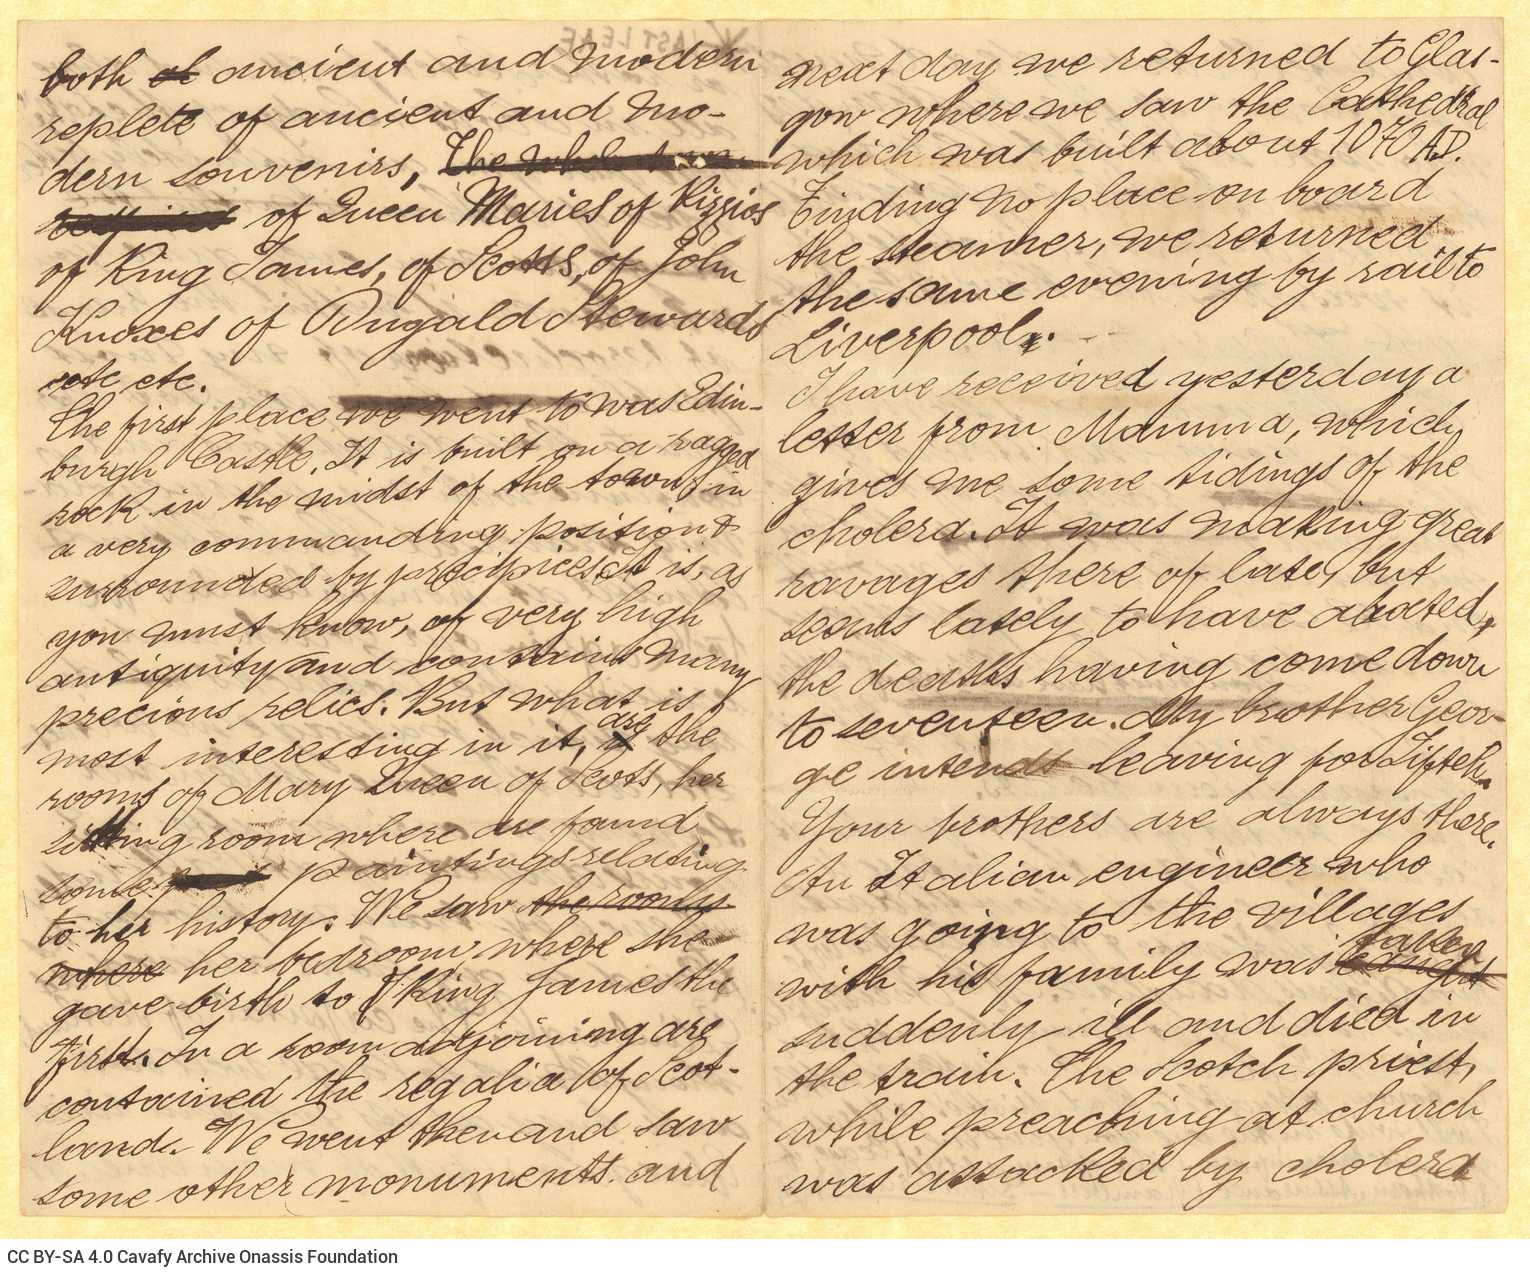 Handwritten letter by Stephen Schilizzi to Cavafy on all sides of two bifolios. Detailed description of the author's trip to 